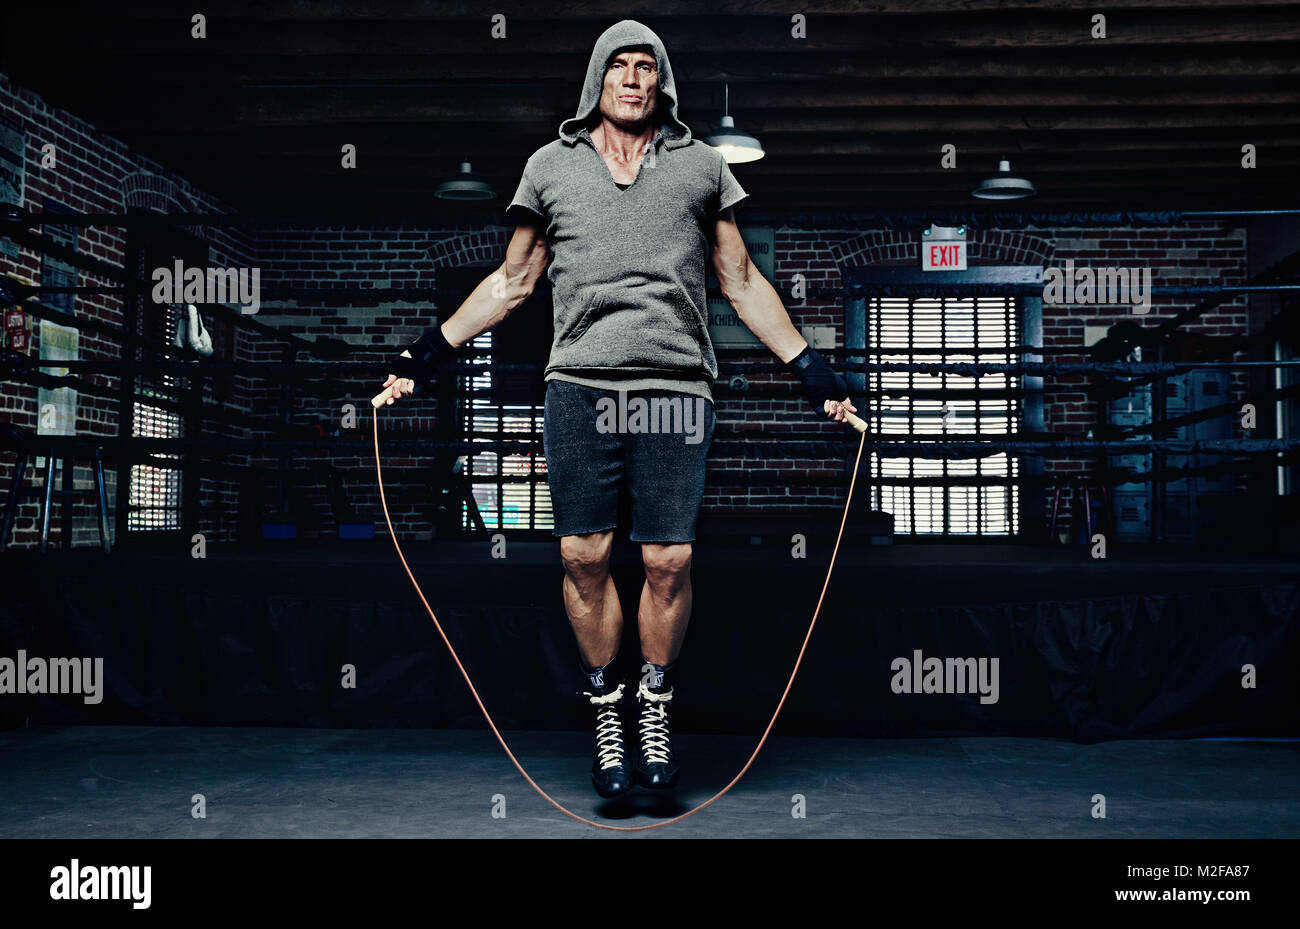 Los Angeles, California, USA. 5th Nov, 2017. DOLPH LUNDGREN Swedish actor, director, screenwriter, producer, and martial artist, works out in a gym. Credit: Brian Lowe/ZUMA Wire/ZUMAPRESS.com/Alamy Live News Stock Photo